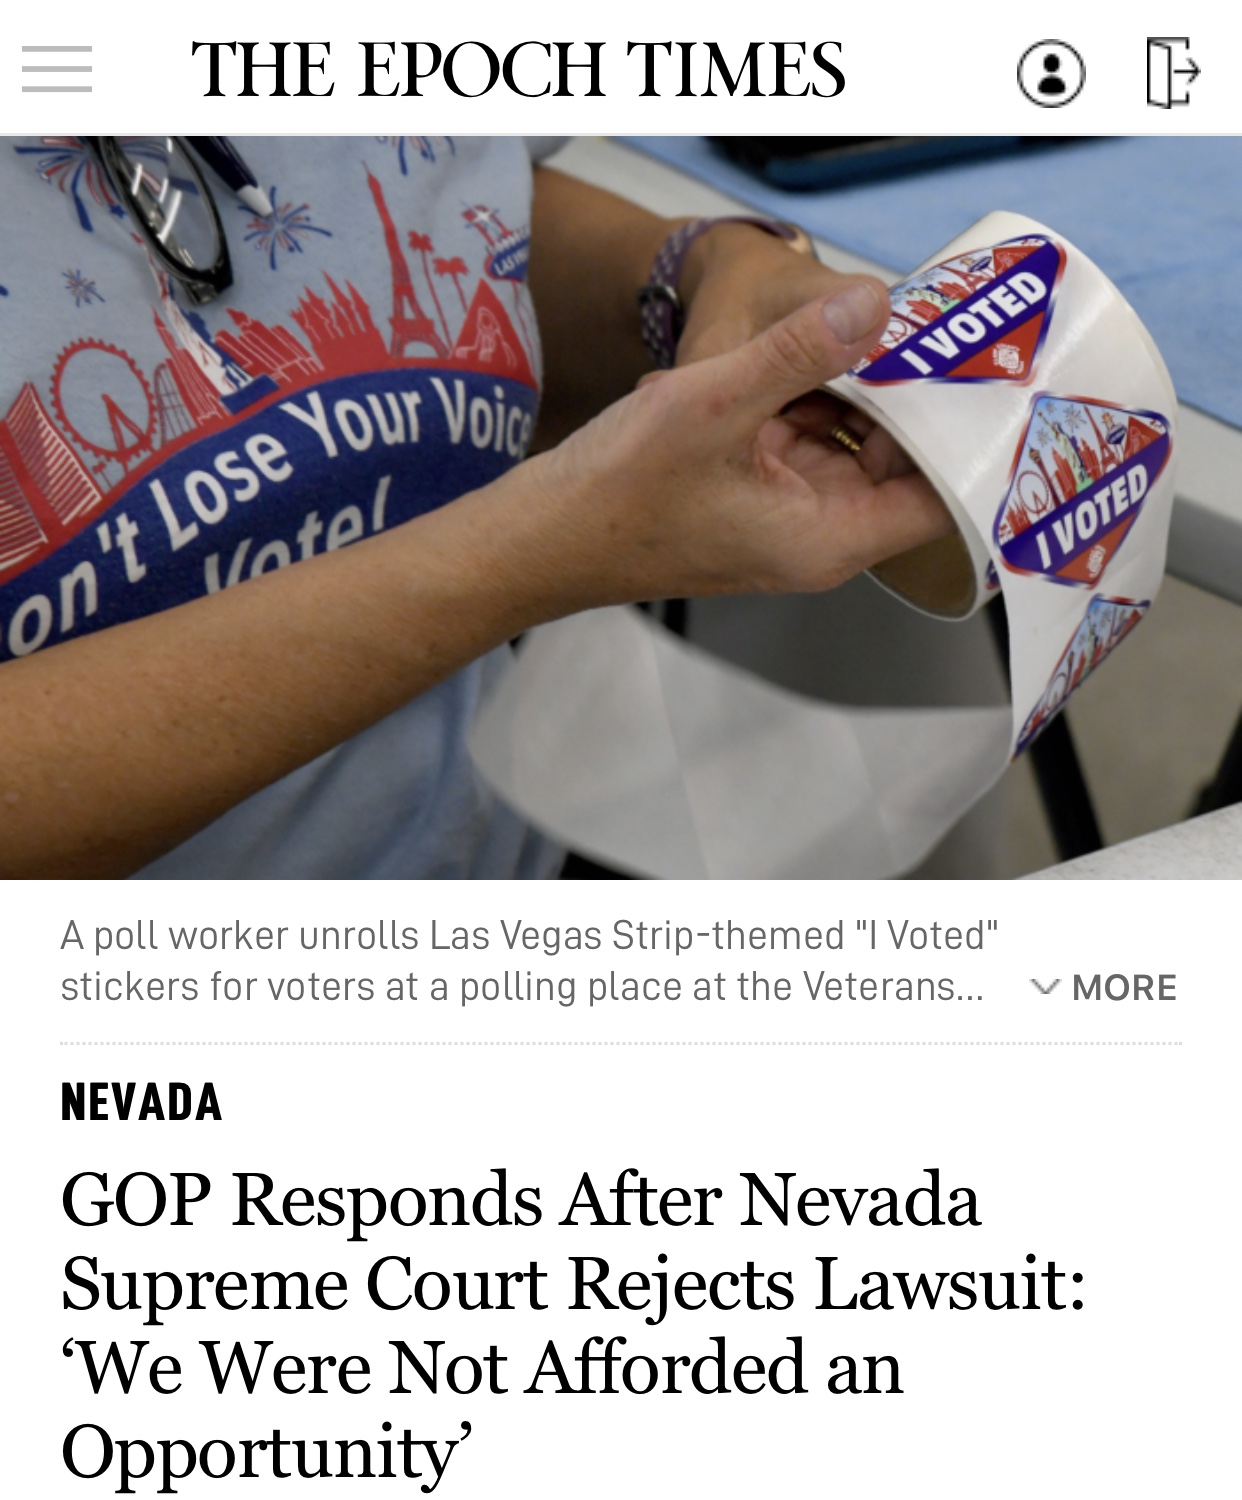 GOP Responds After Nevada Supreme Court Rejects Lawsuit: ‘We Were Not Afforded an Opportunity’